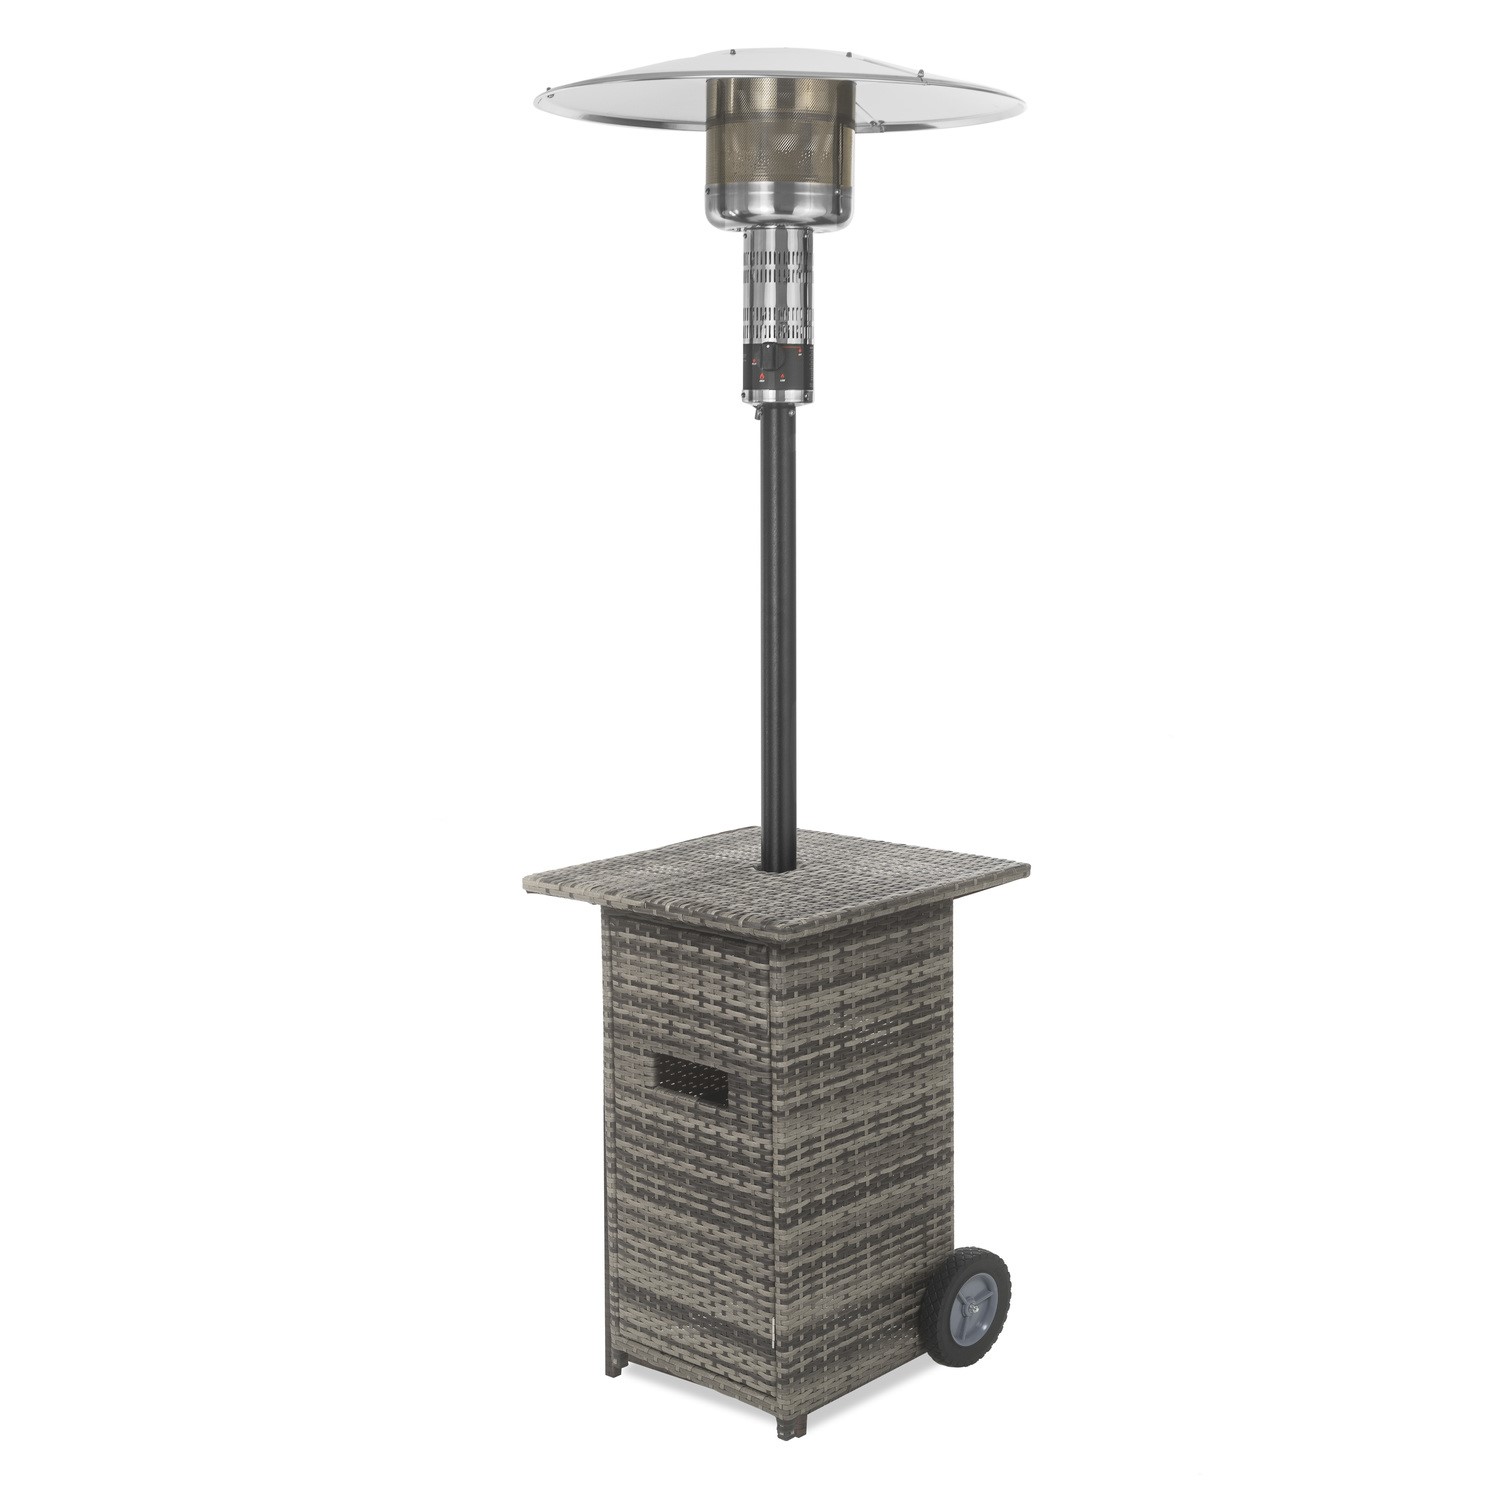 Mushroom Outdoor Gas Patio Heater - Grey Wicker/Rattan with Free Cover